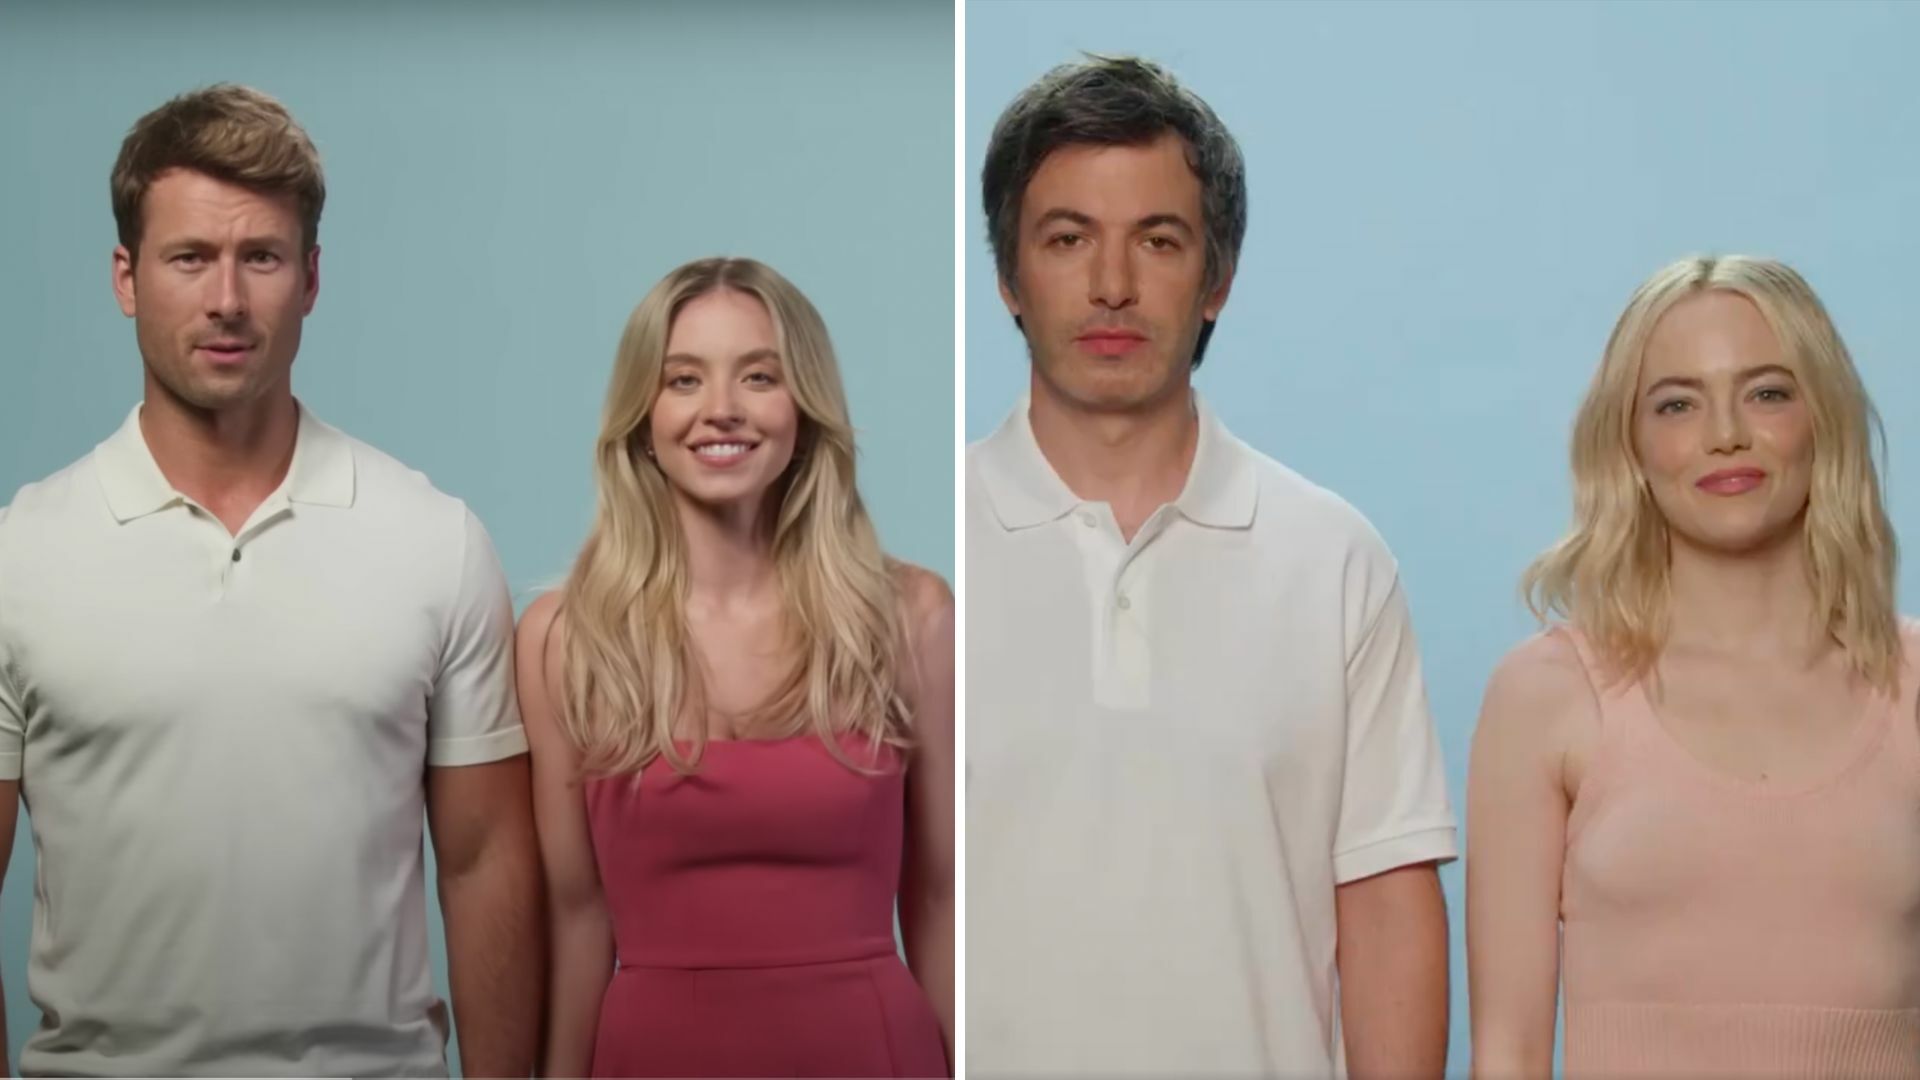 A side by side comparison of two images, both of a man in a white polo standing next to a woman in a pink top against a blue backdrop.